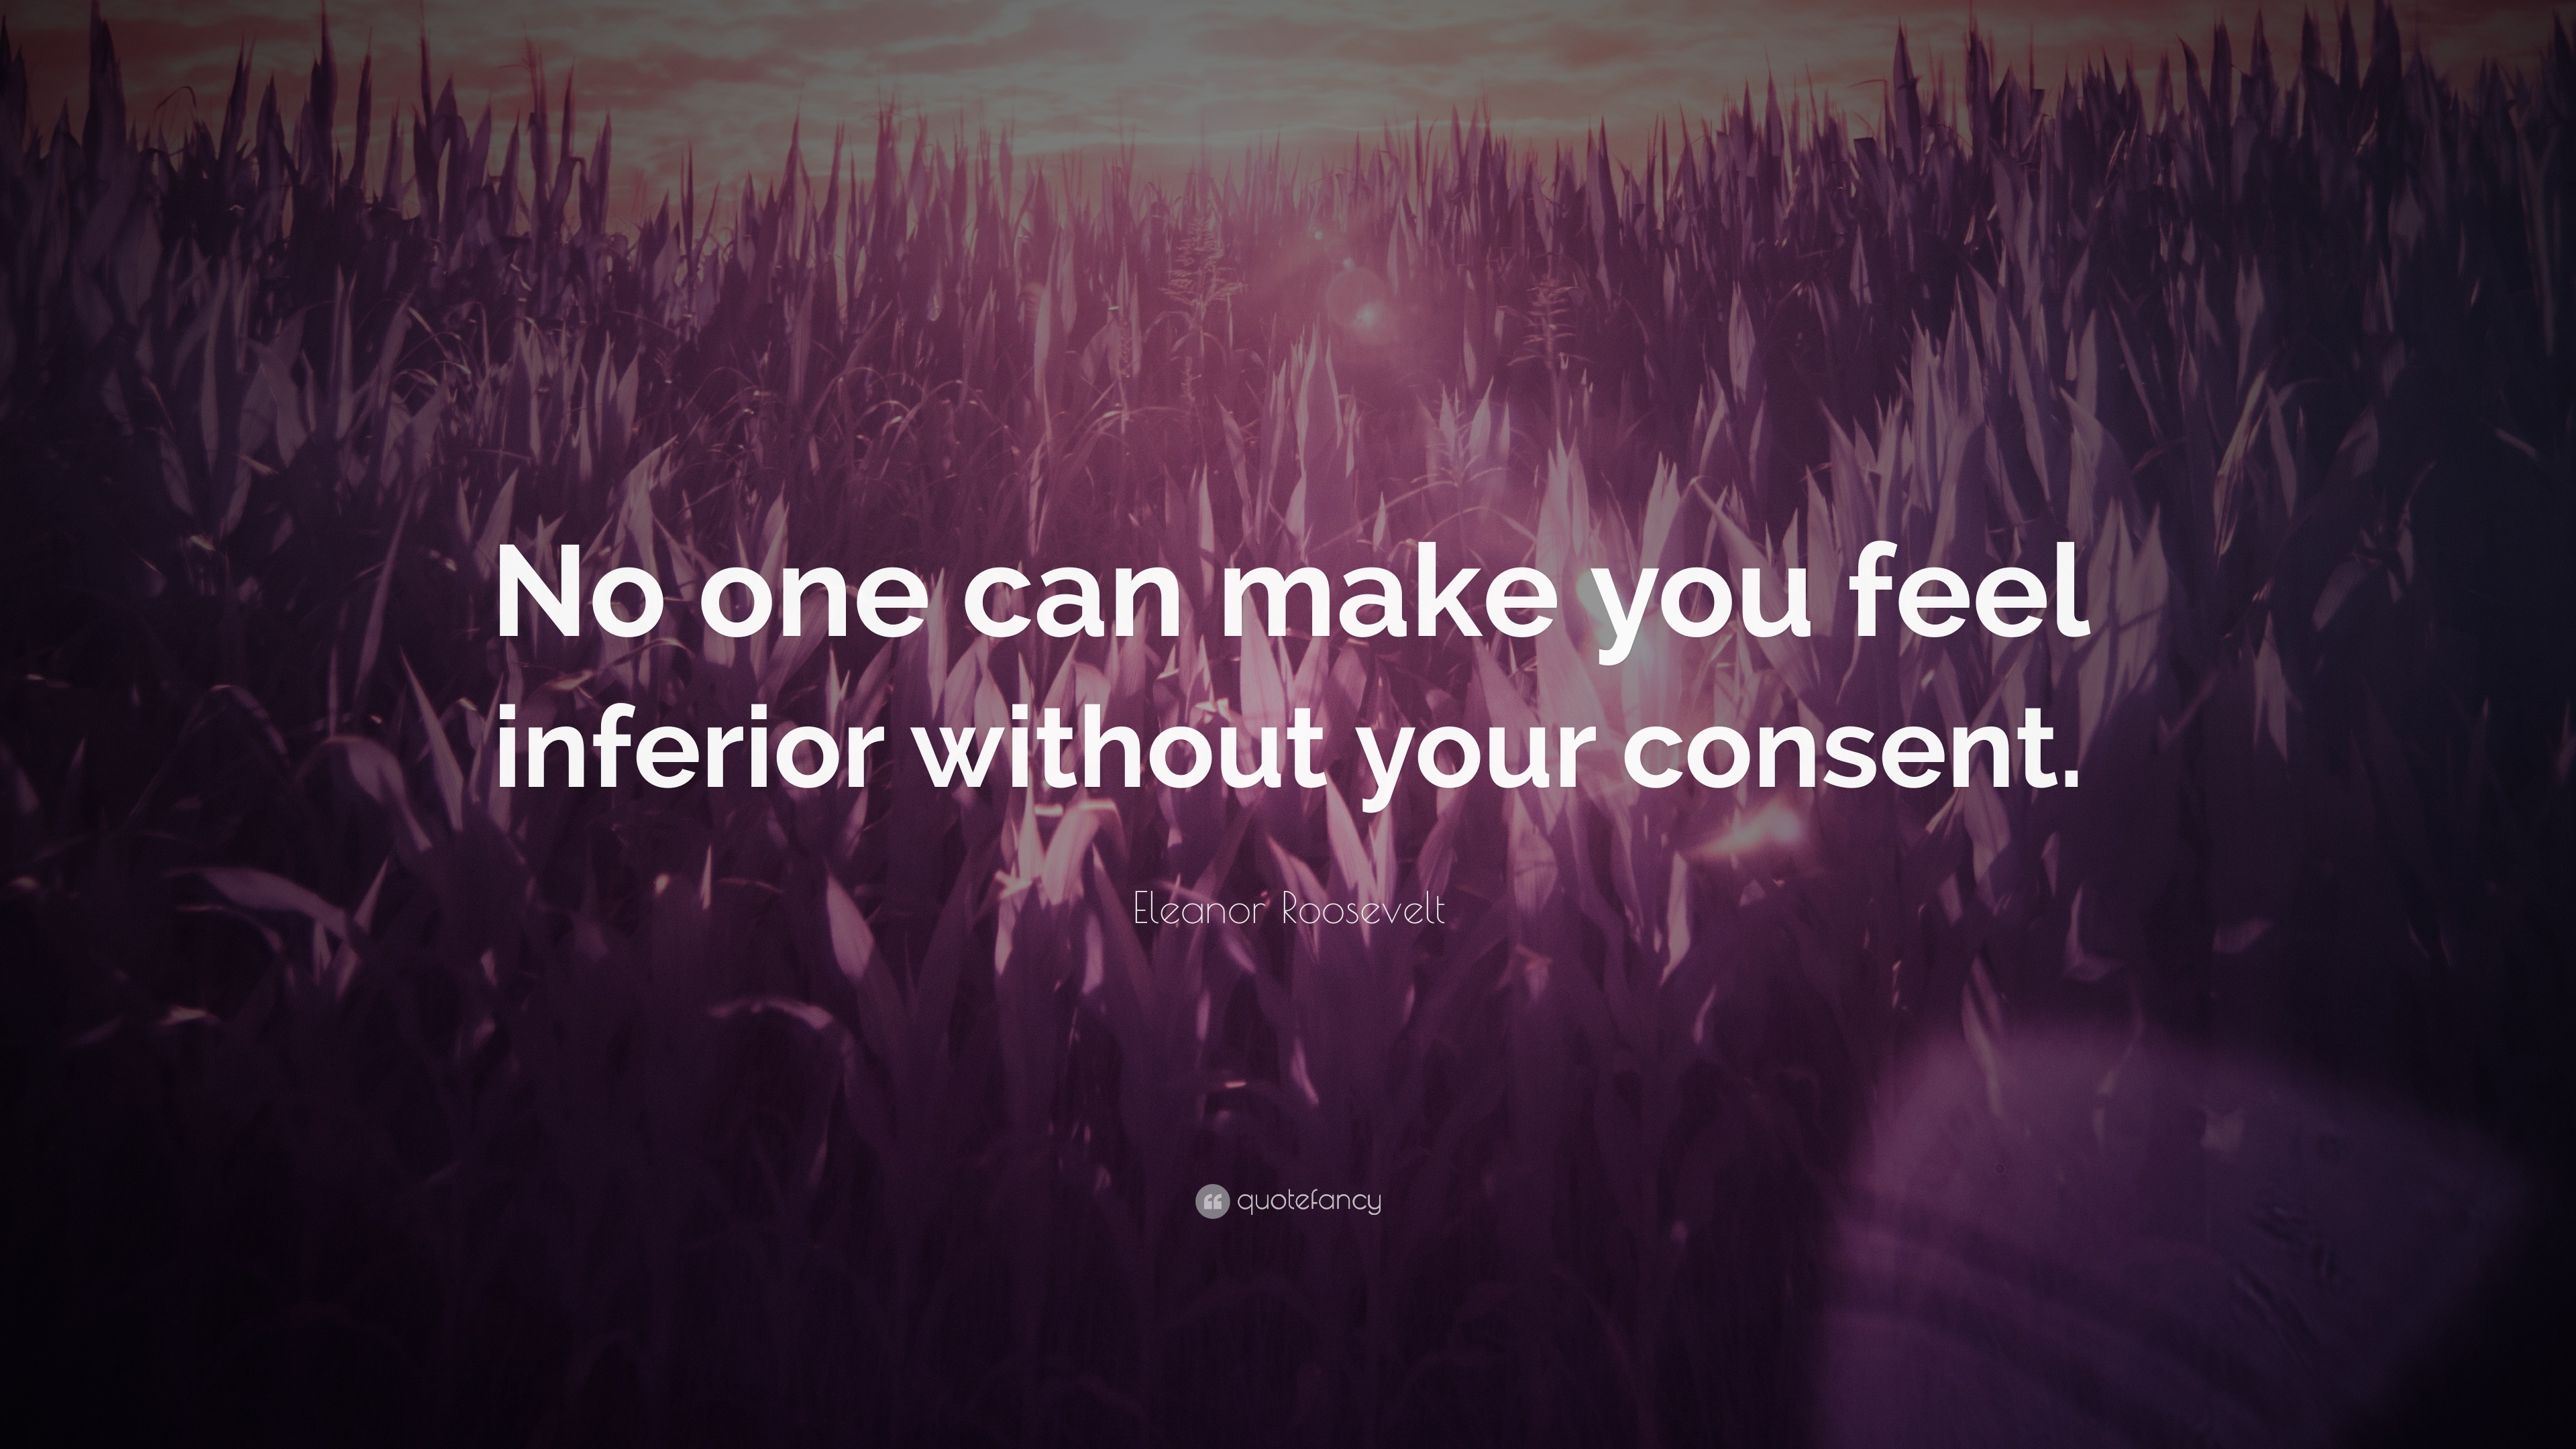 Eleanor Roosevelt Quote: “No one can make you feel inferior without